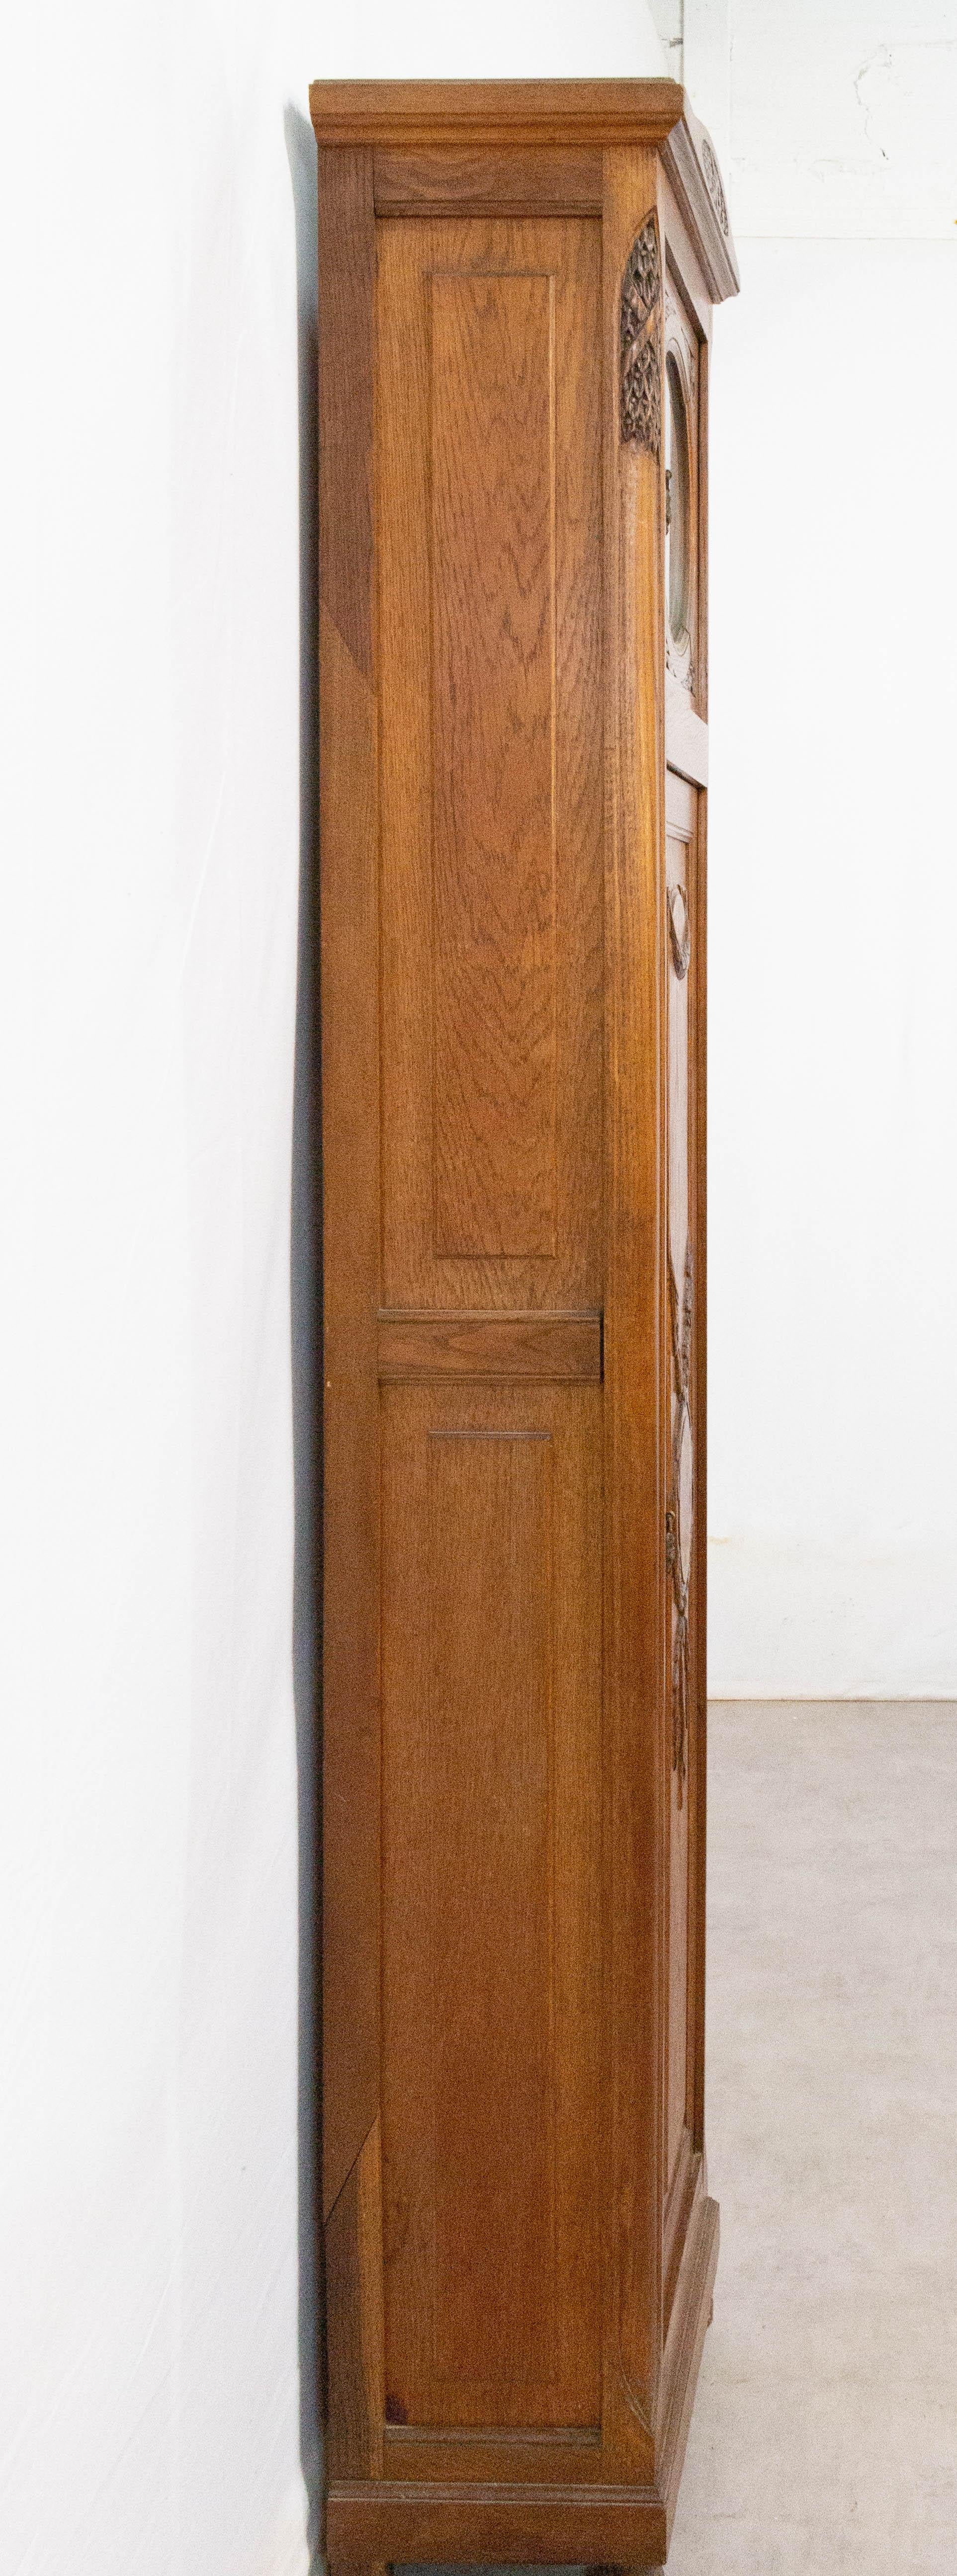 French cupboard into an Art Nouveau/Art Deco longcase clock
Oak
The shelves can be renovated if you wish
Good antique condition.

Shipping:
203 x 30 x 45 cm 30kg.